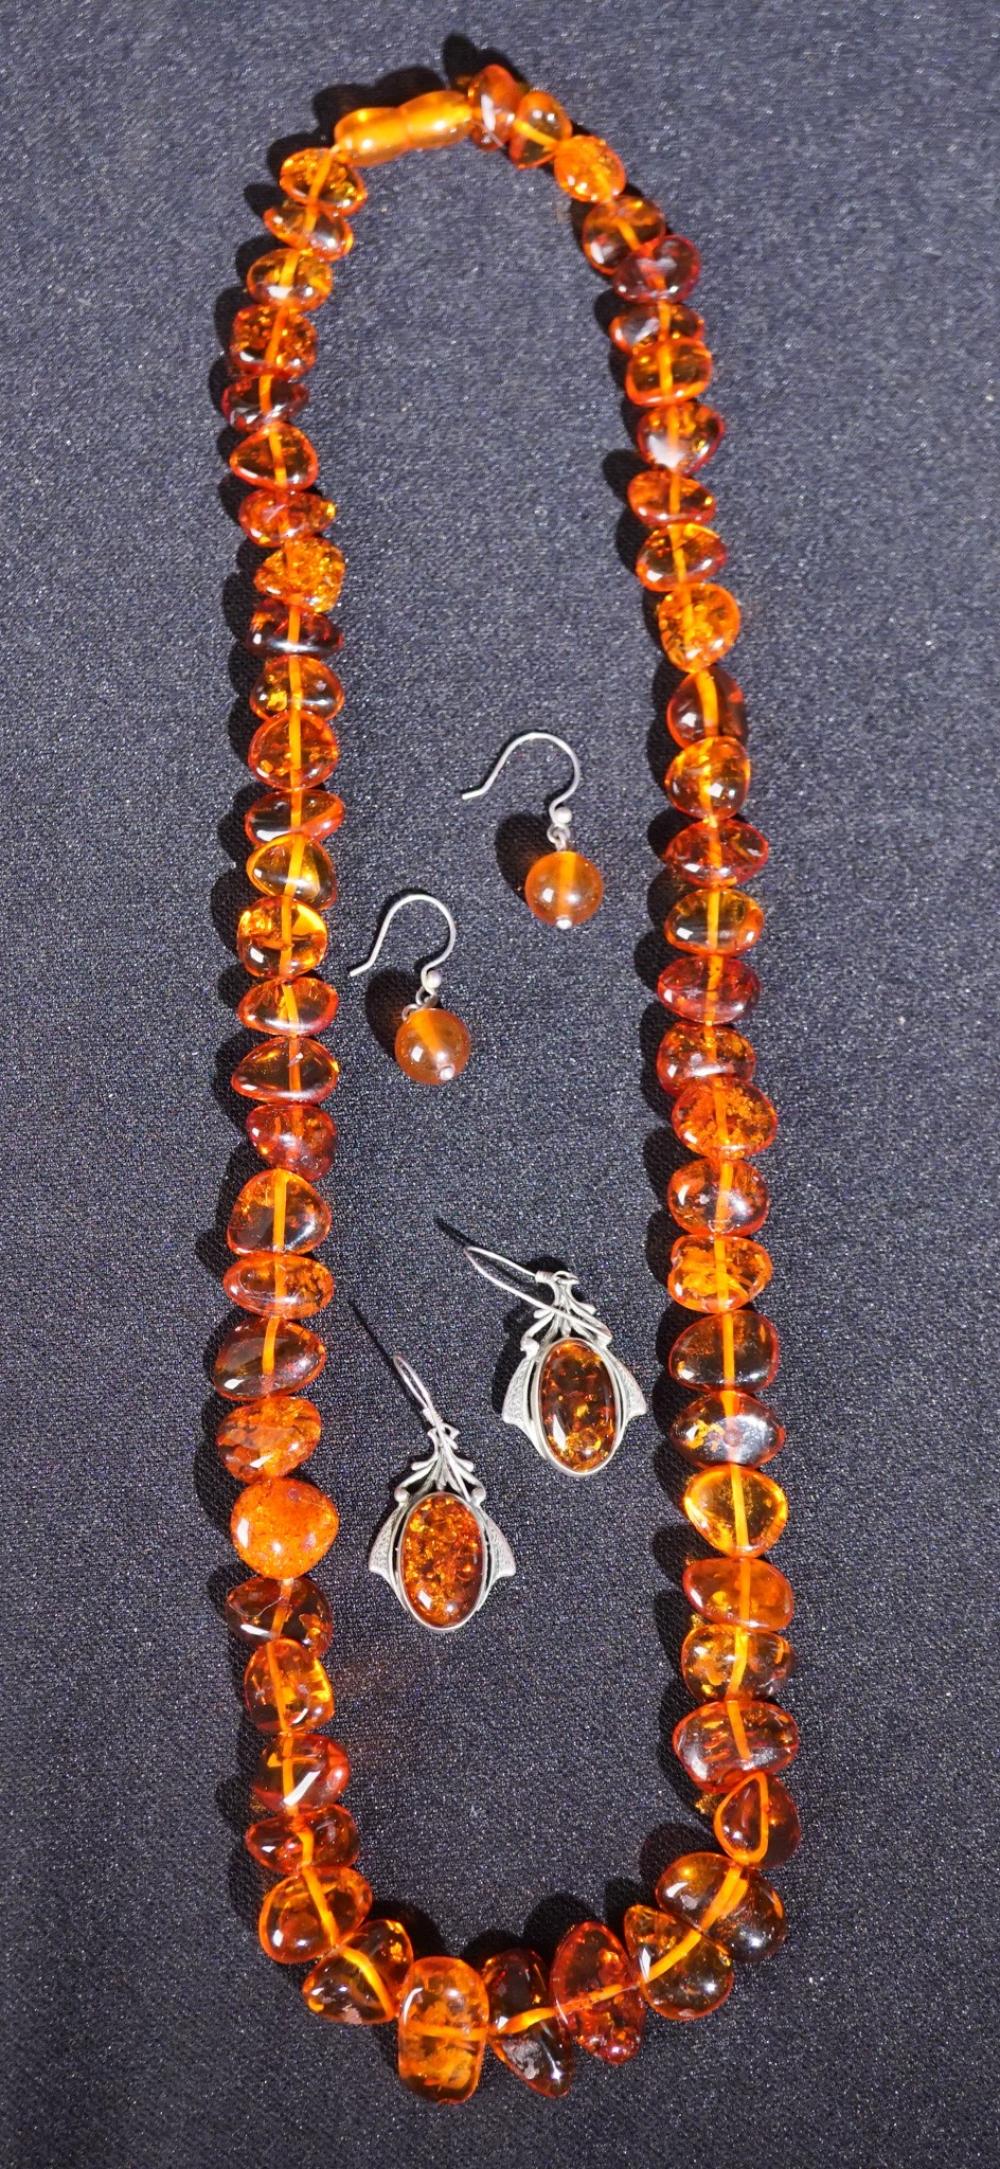 COLLECTION OF AMBER TYPE JEWELRYCollection 2e6ef0